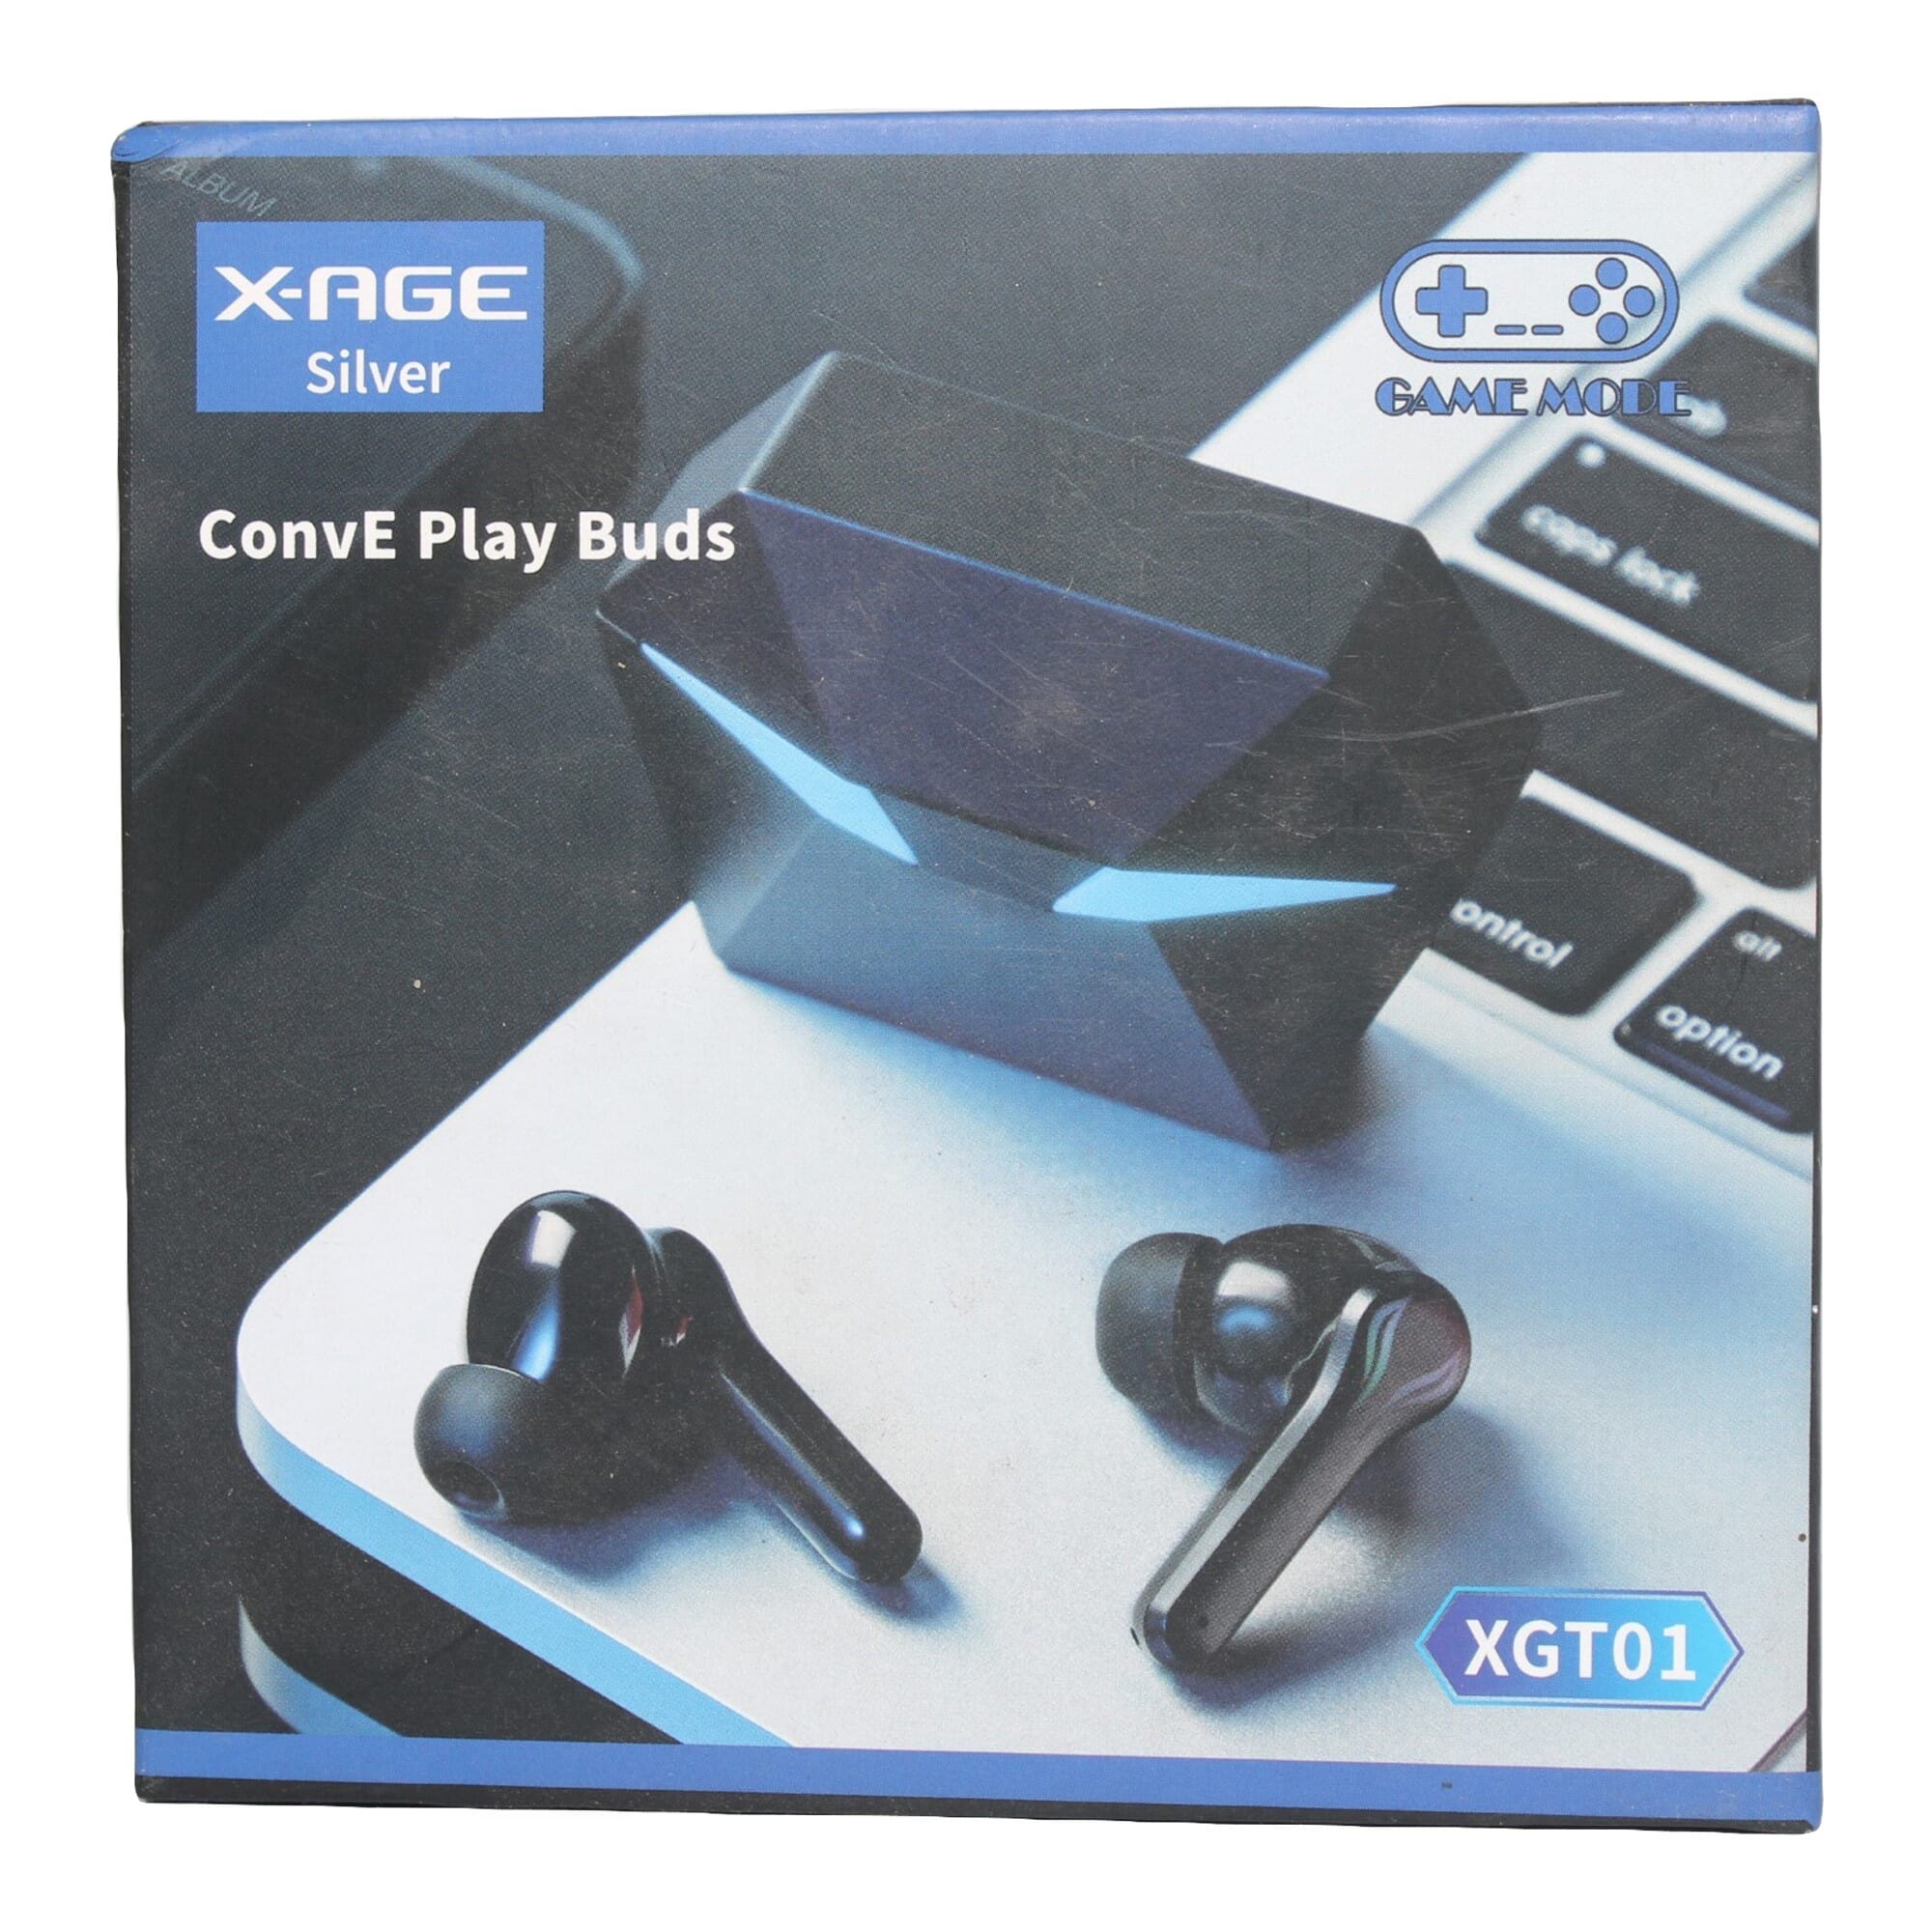 X-age Silver Xgt01 Conve Play Buds/earbuds